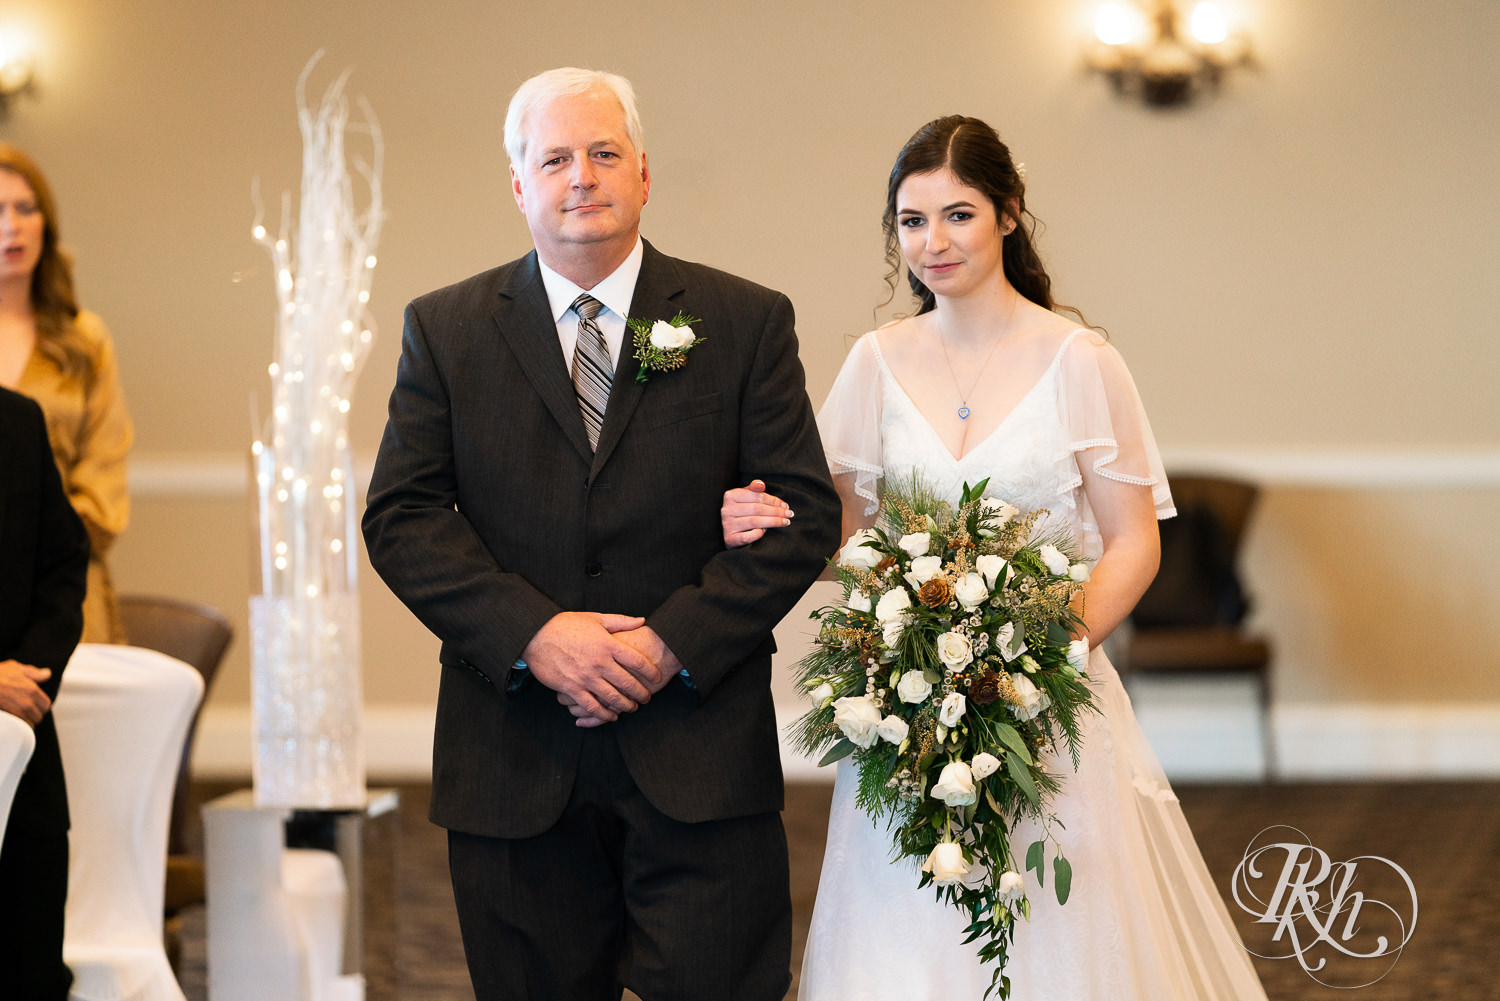 Bride walking down the aisle with dad at wedding ceremony at Minneapolis Golf Club in Saint Louis Park, Minnesota.